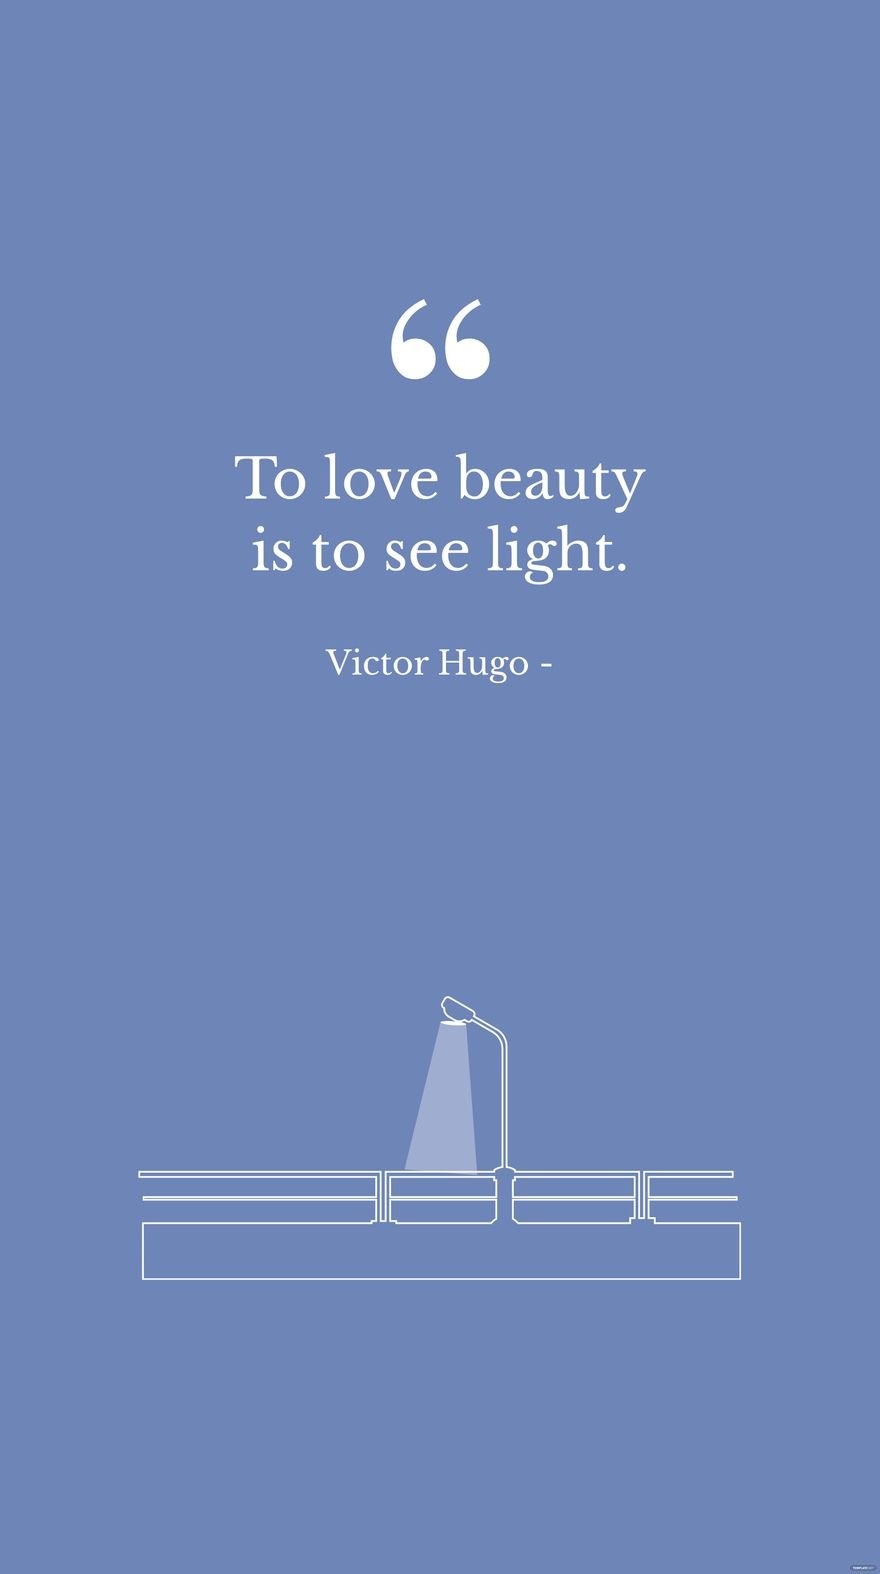 Victor Hugo - To love beauty is to see light. in JPG